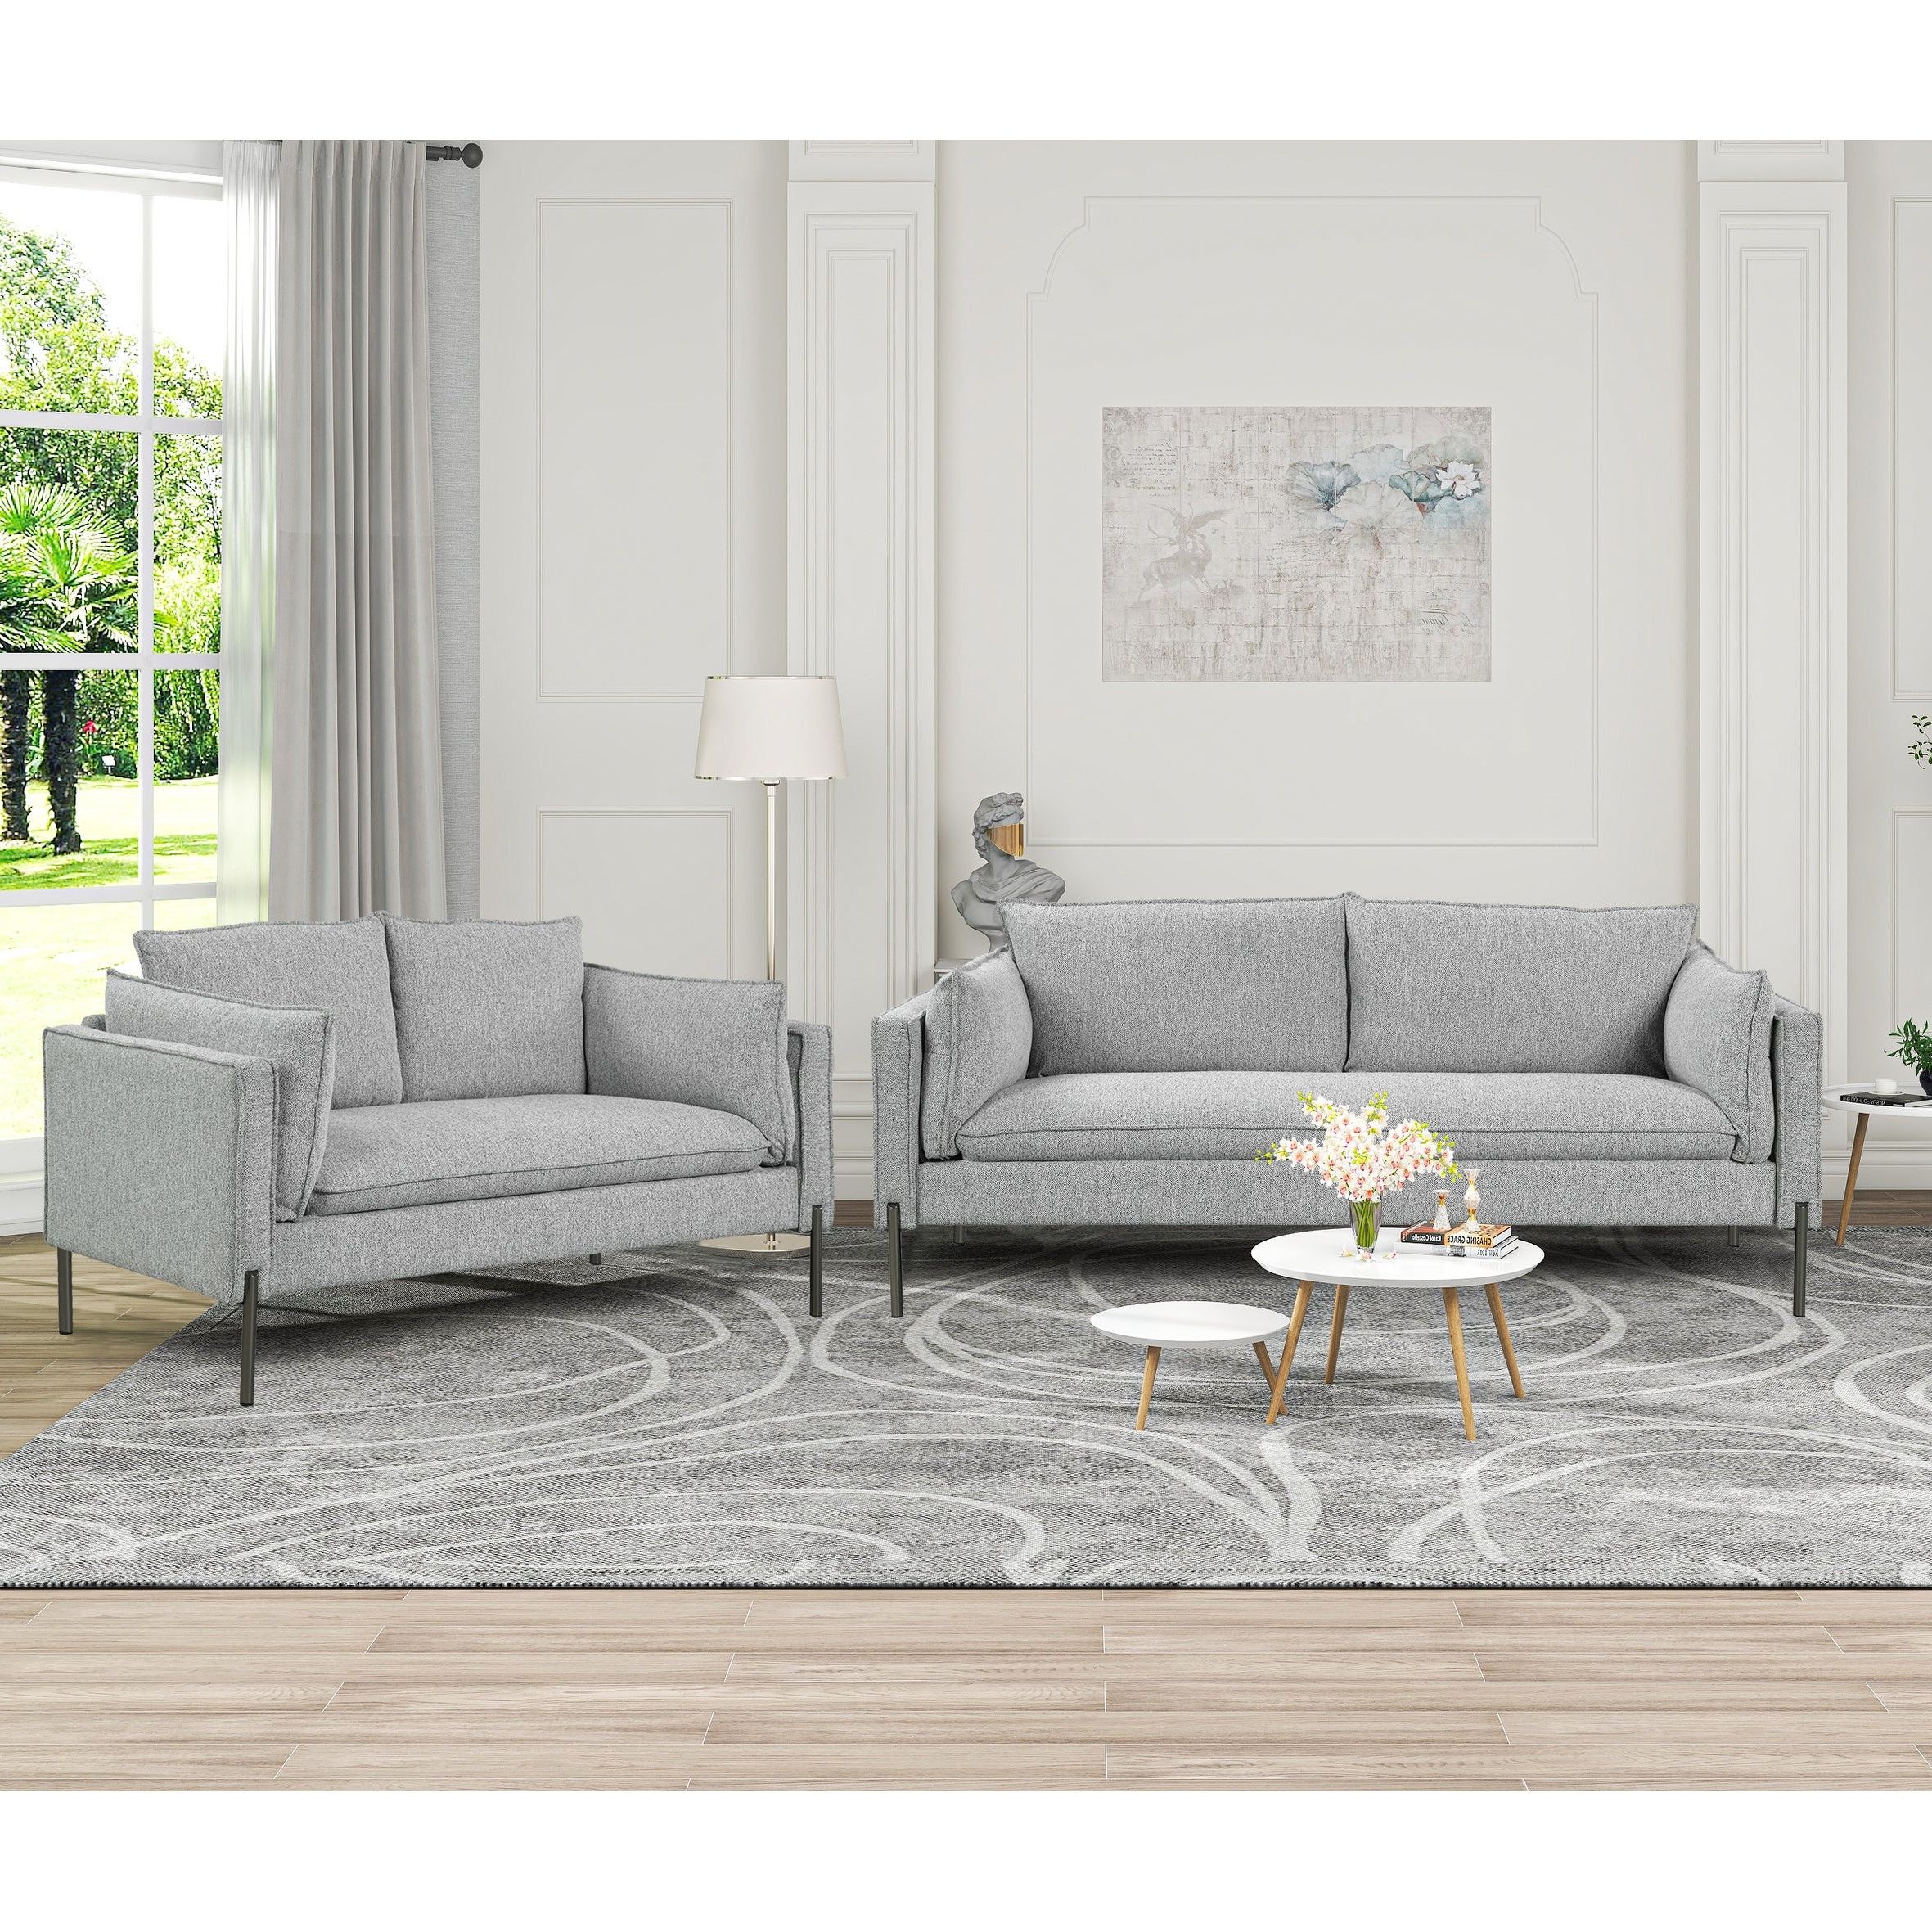 2 Piece Sofa Sets Modern Linen Fabric, Loveseat And 3 Seat Couch Set  Furniture – – 36800312 Intended For Modern Linen Fabric Sofa Sets (View 2 of 20)